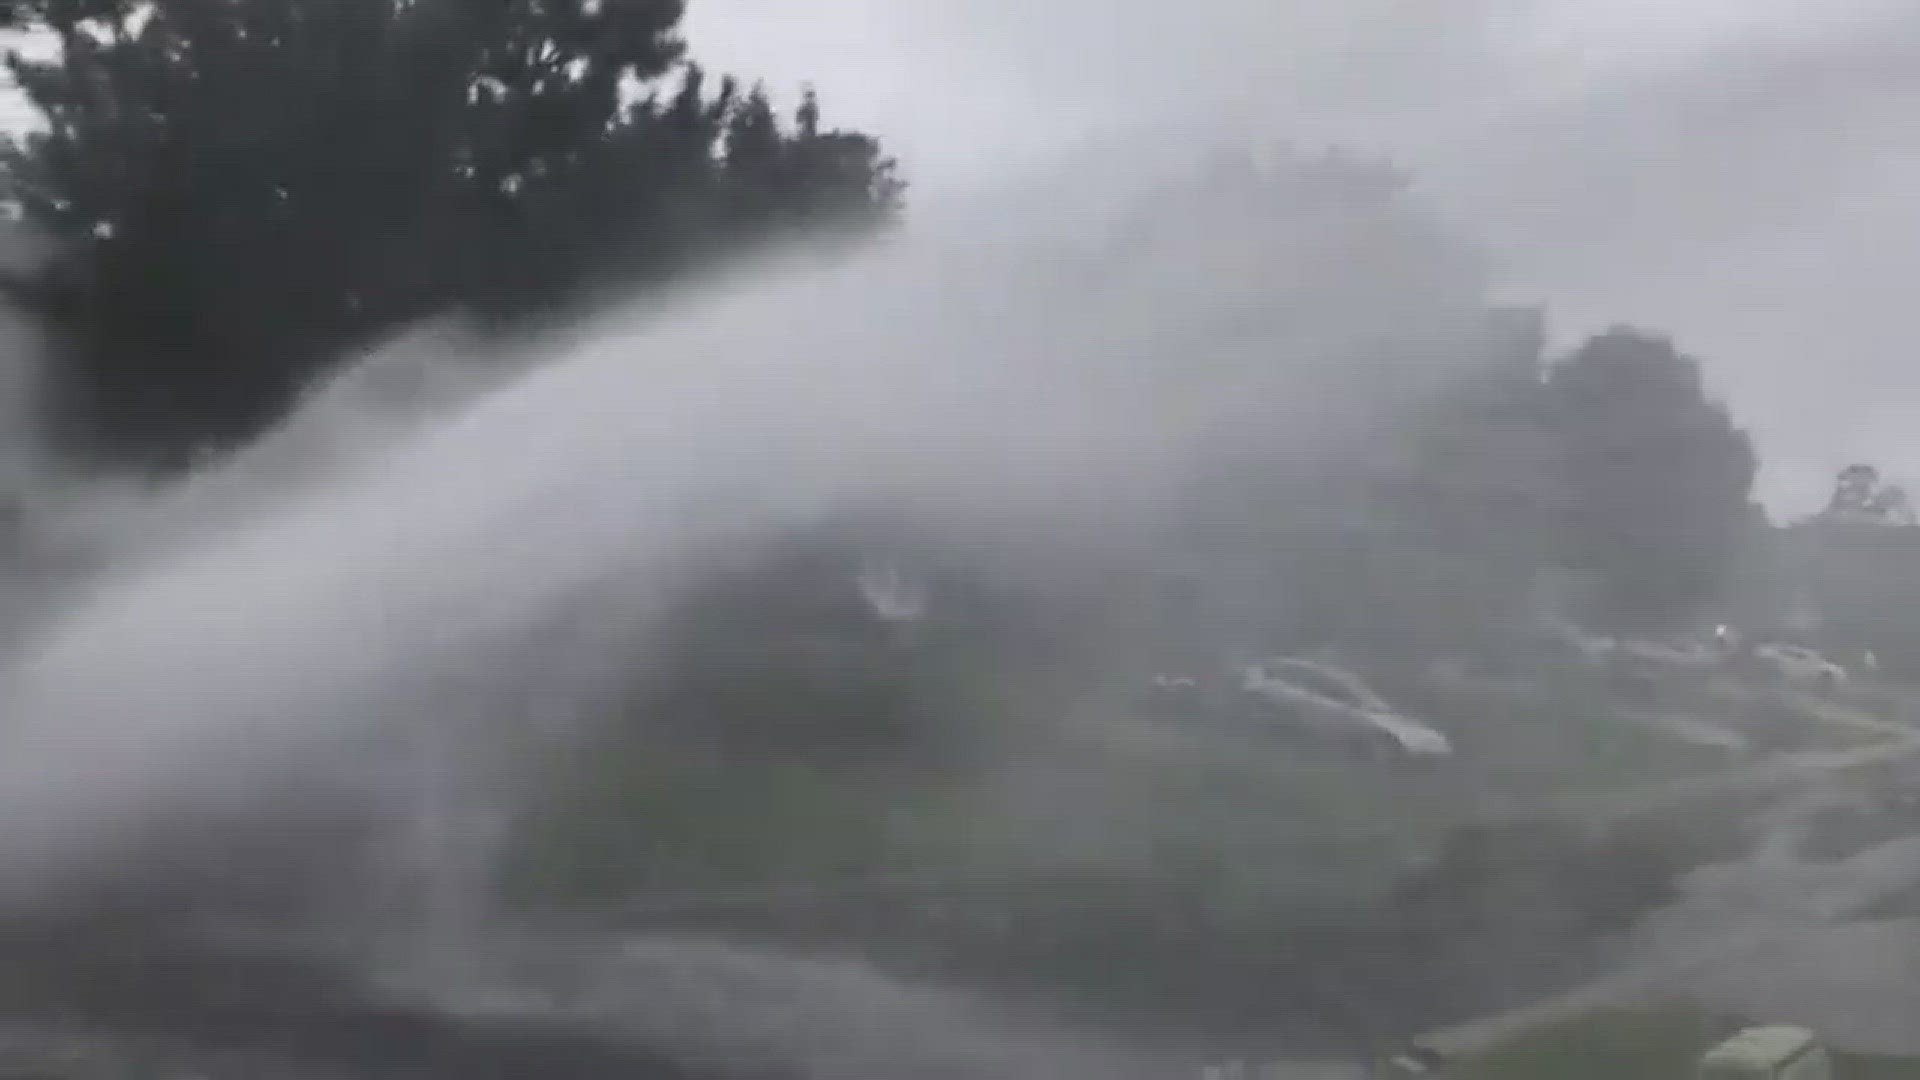 A powerful water main break in University City shot water 10 feet into the air, on top of the rainfall the area has already gotten from Florence. Video: Mike O'Hara